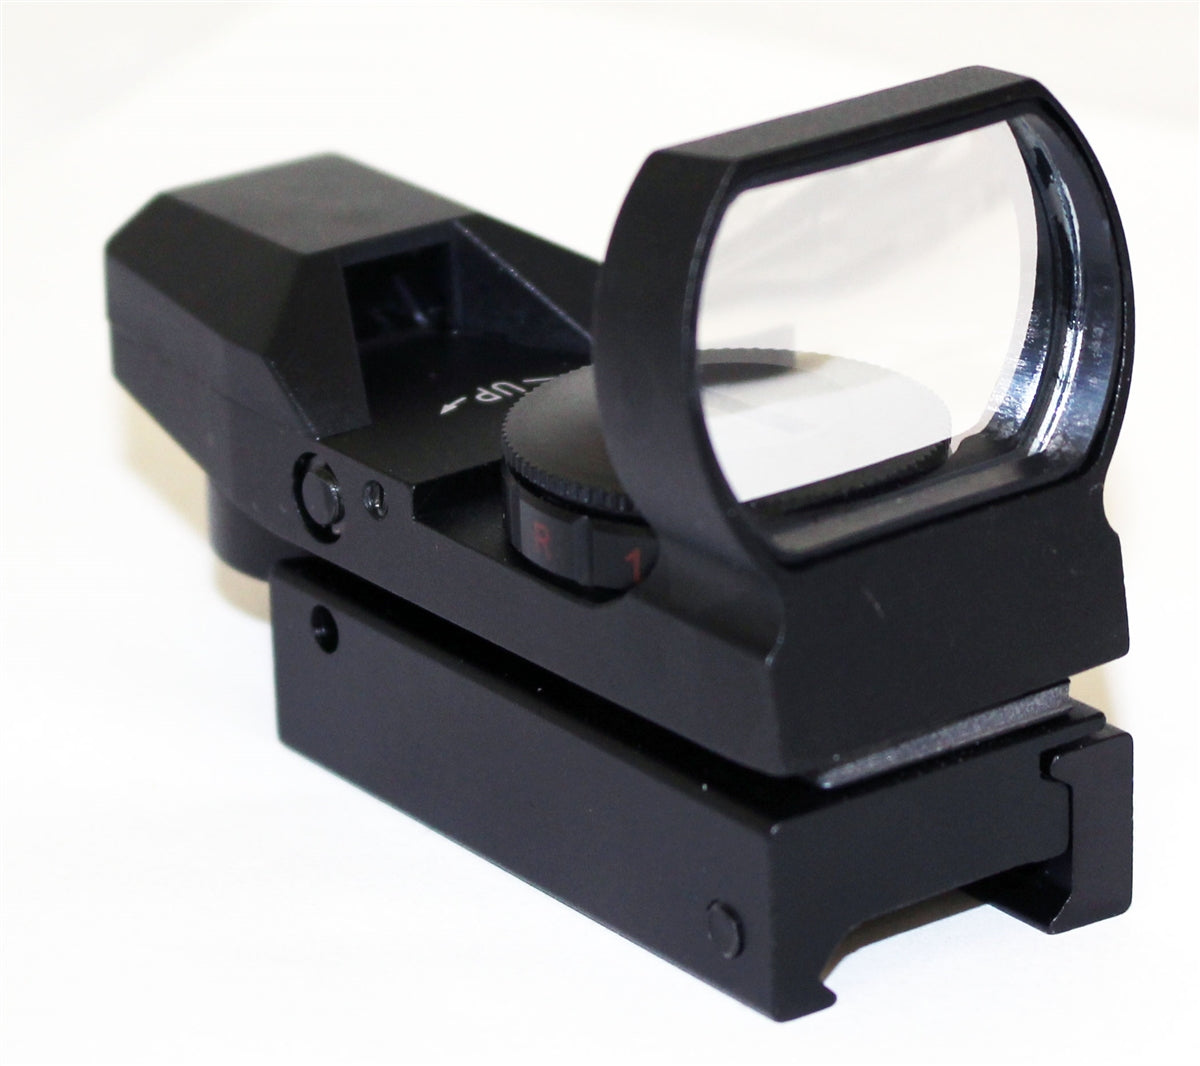 Trinity reflex sight with 4 reticles red green for Tippmann Project Salvo paintball guns.